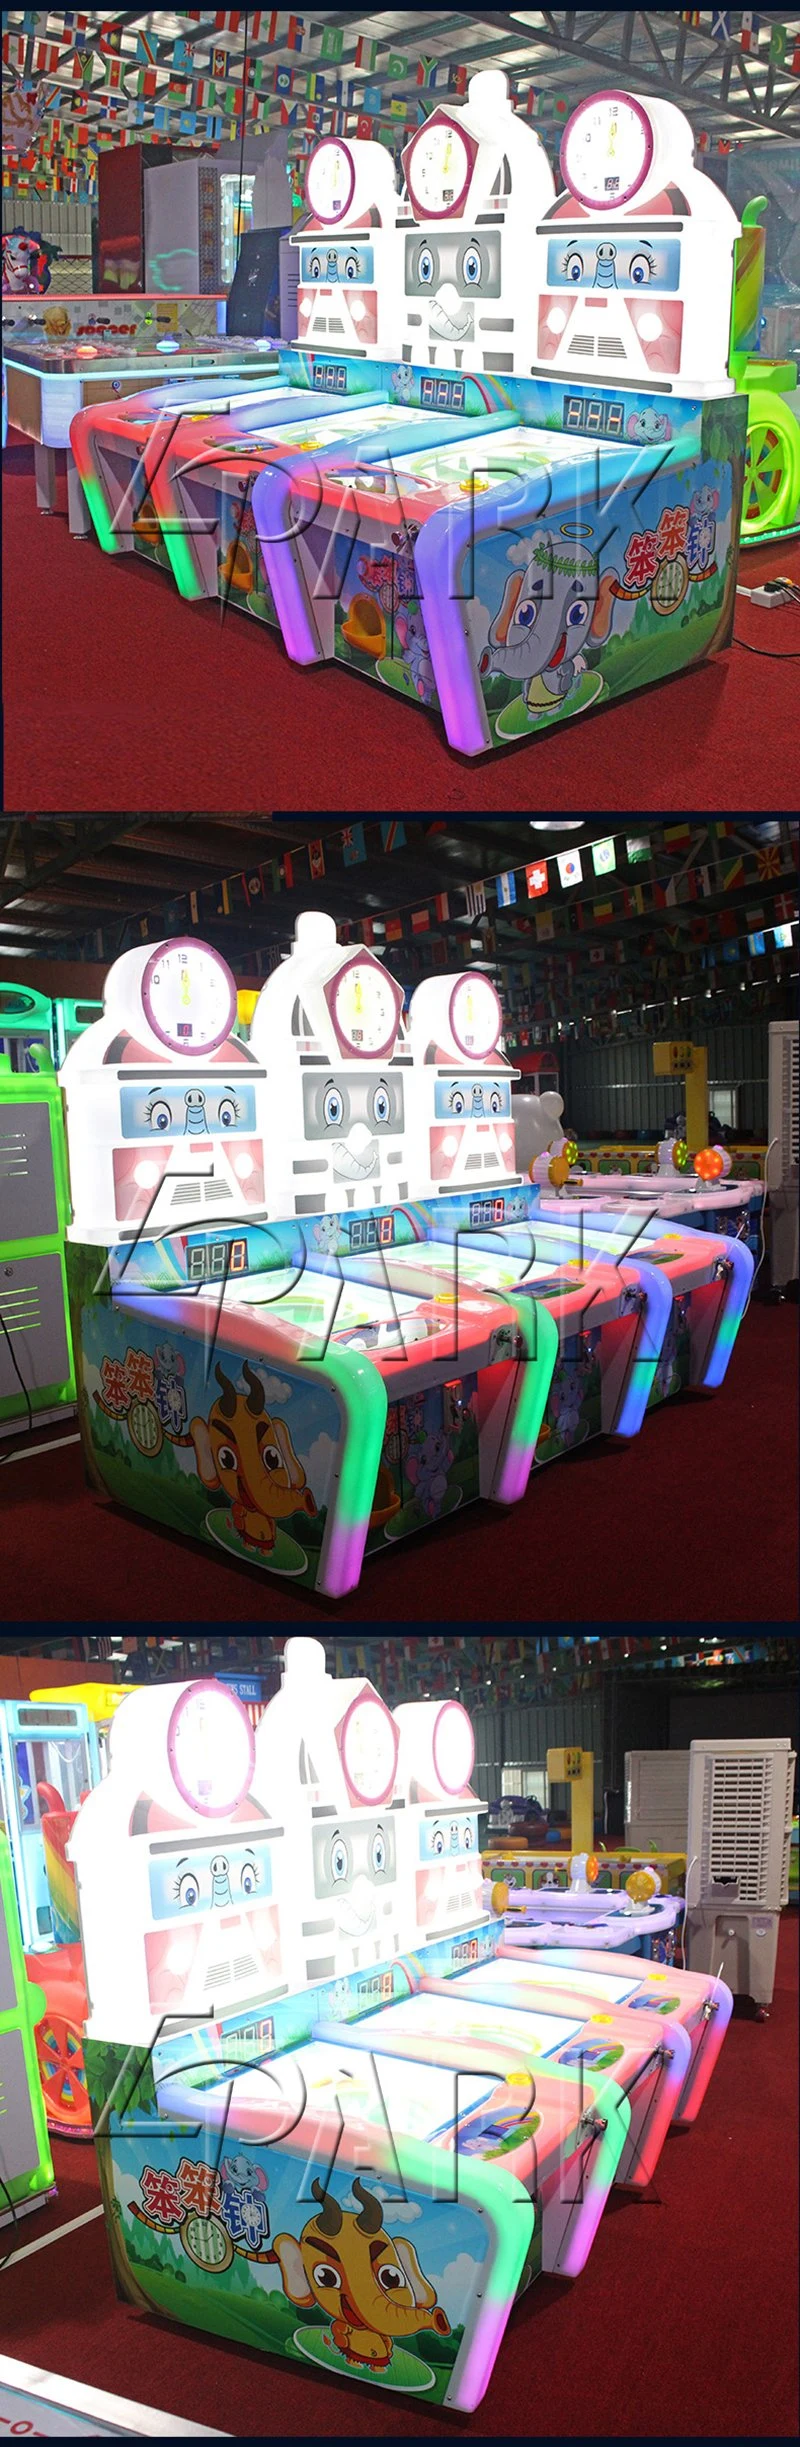 Ireland Arcade Electronic Pinball Machine Automatic out Ball Game Lottery Arcade Machine for Sale